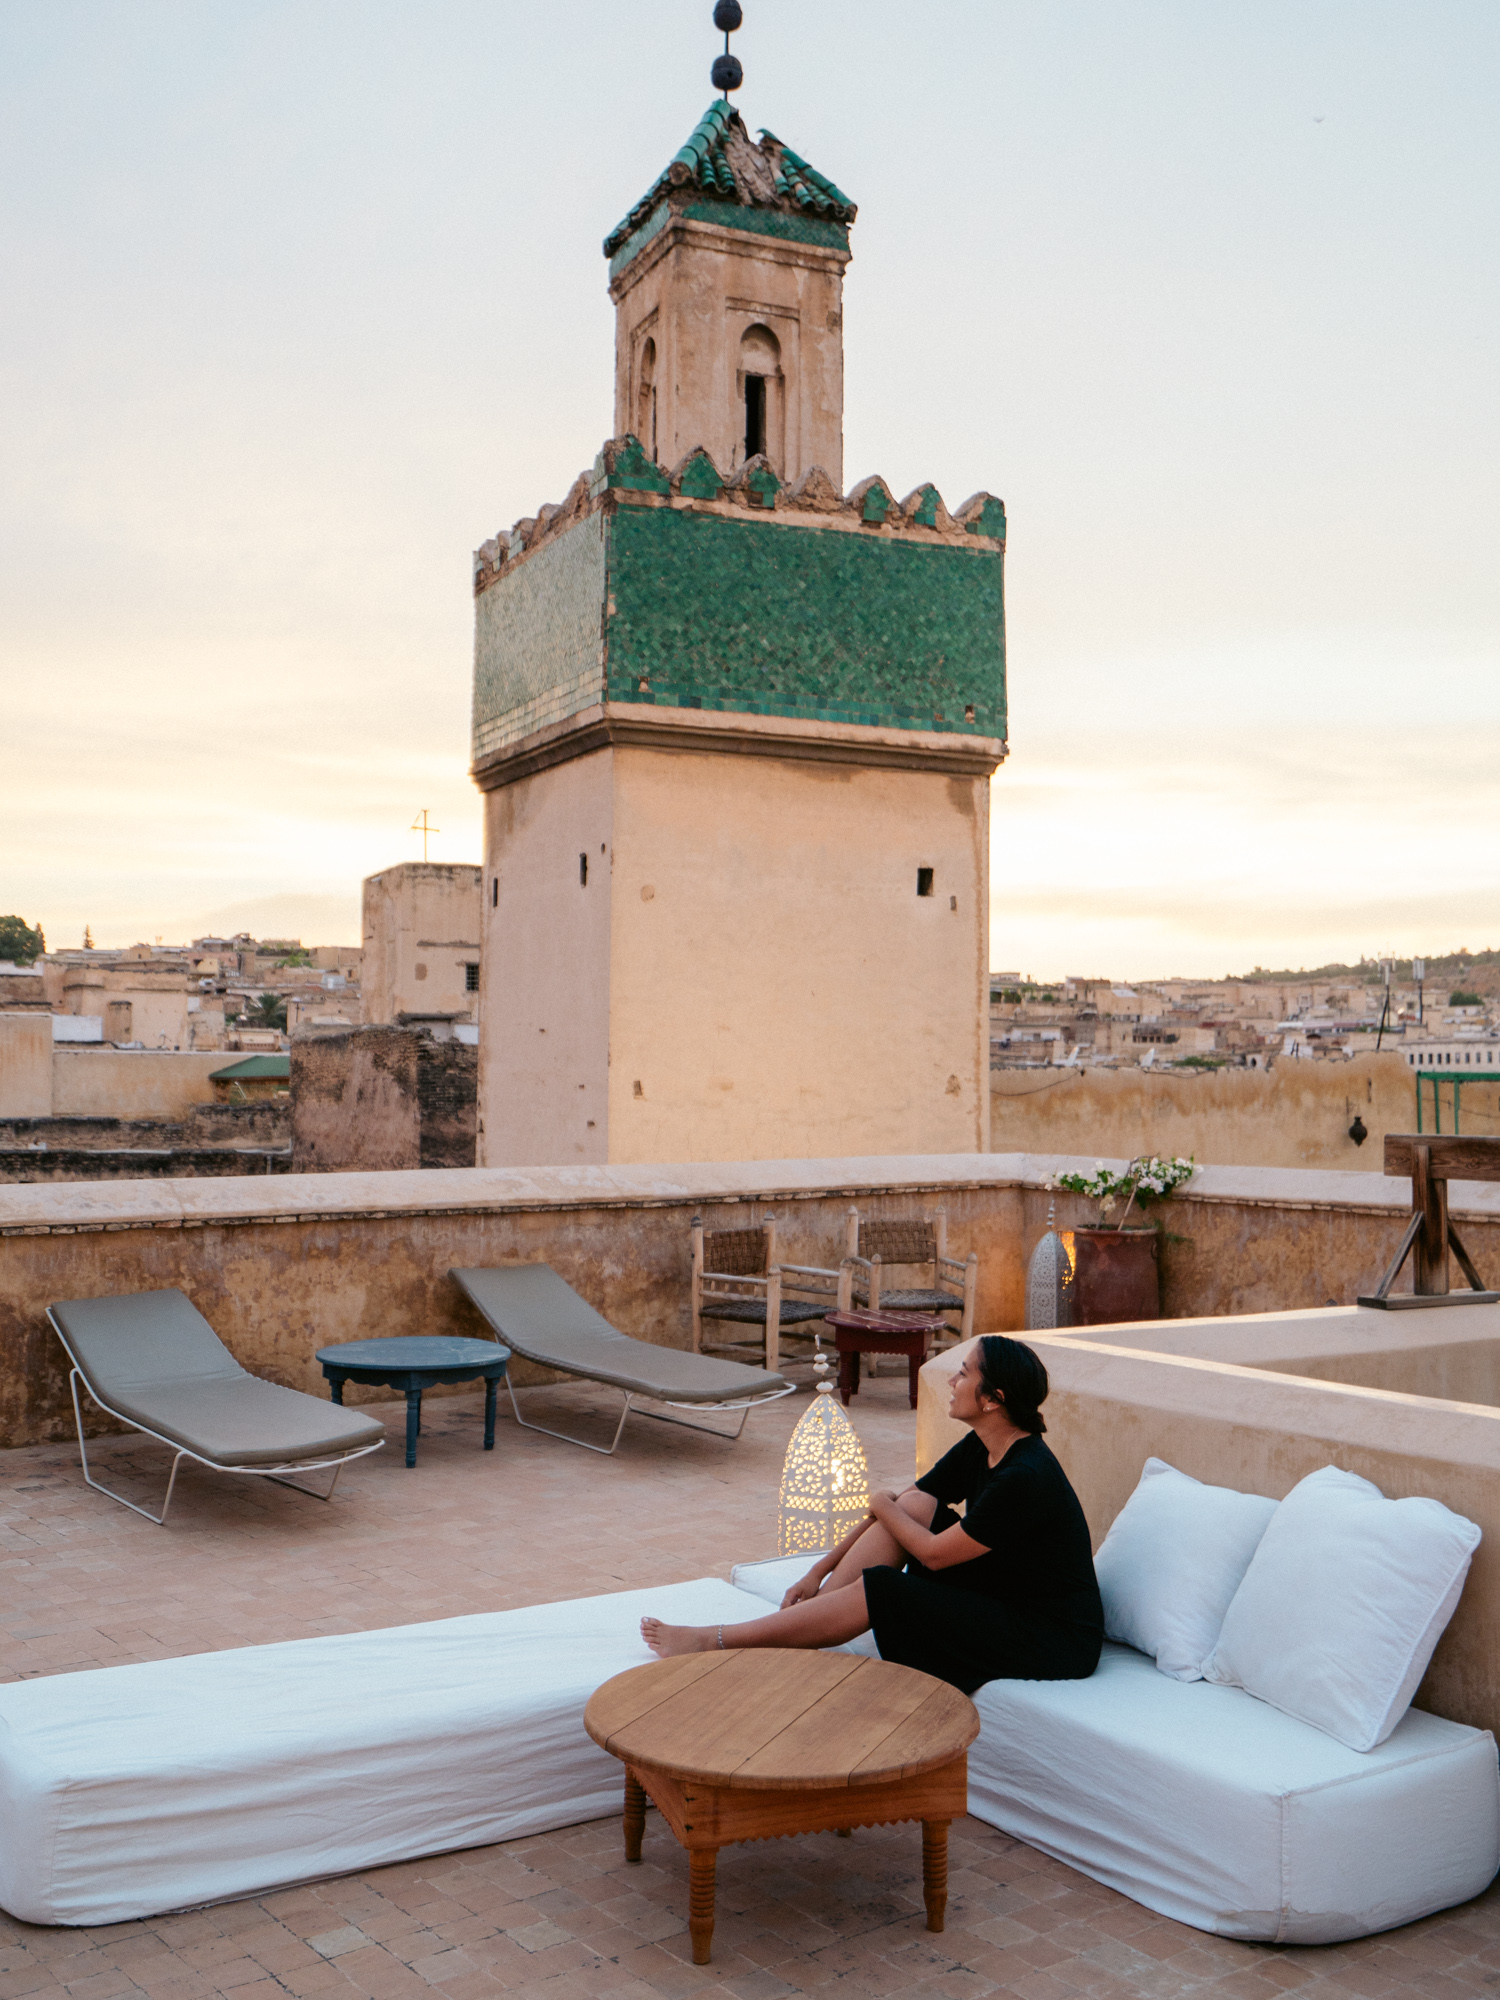 Where to stay in Fez